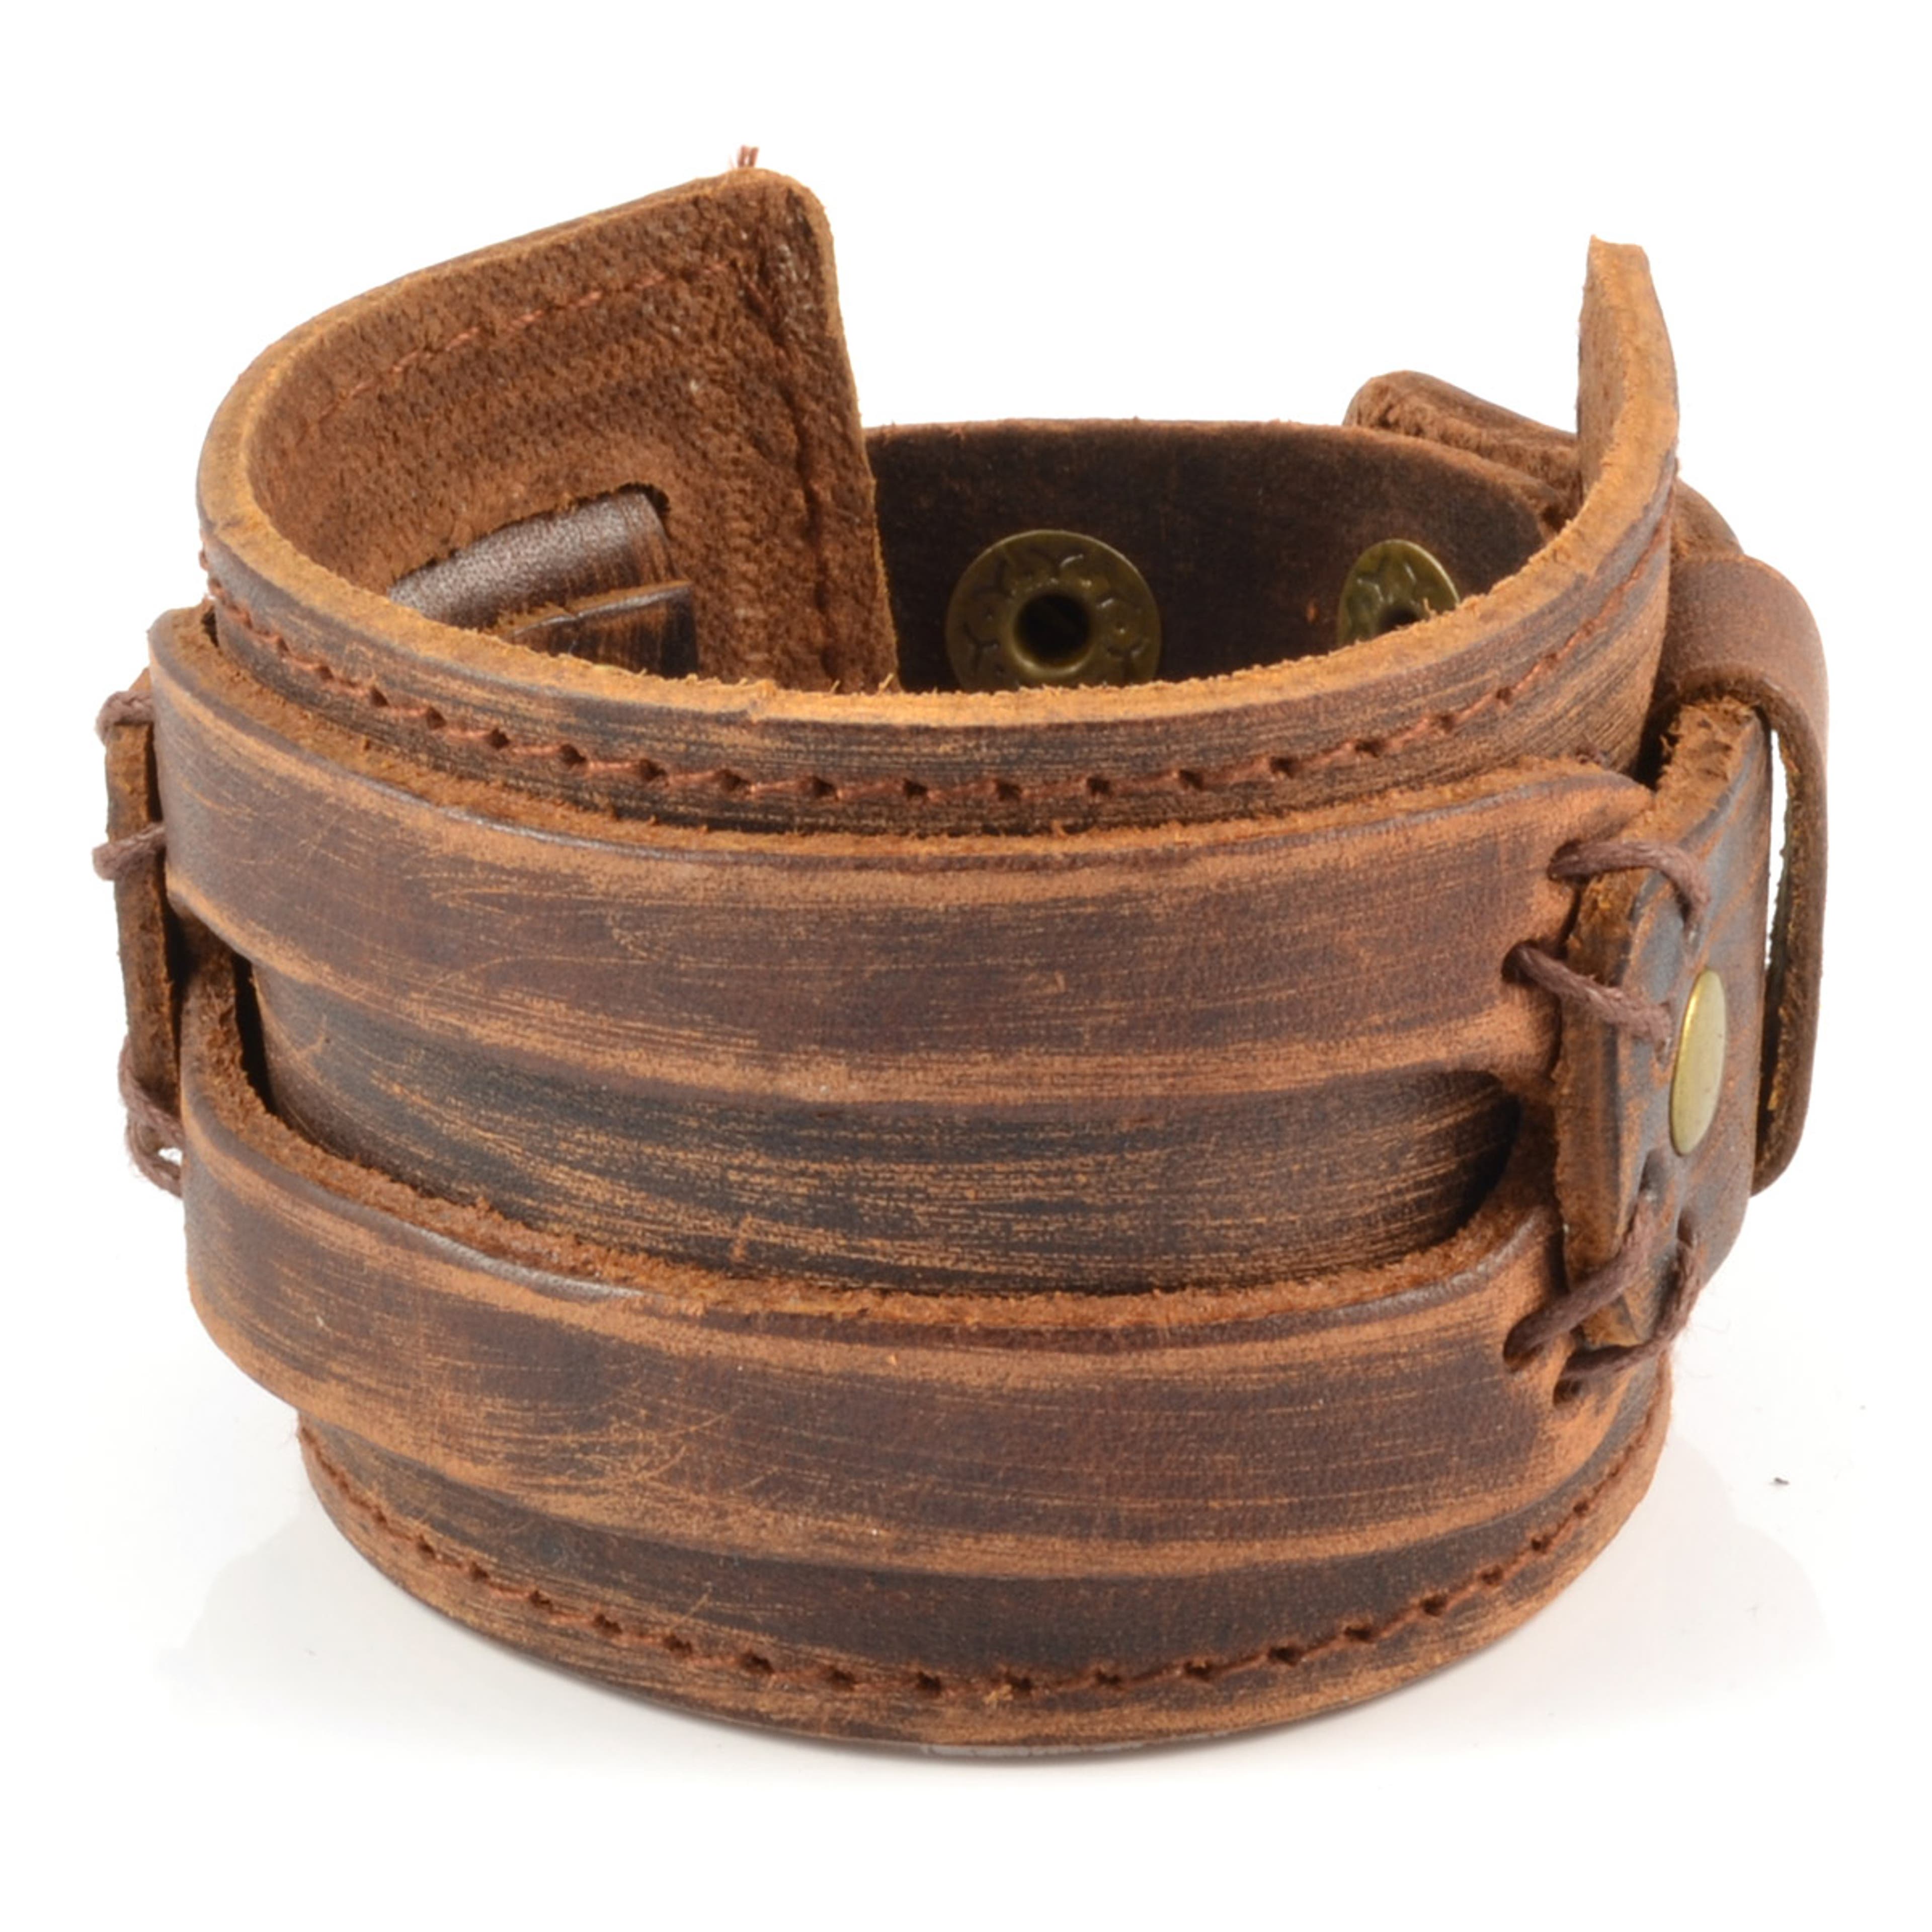 Agrarisch Mordrin Smash Golden Brown Leather Cuff Bracelet | In stock! | Collin Rowe